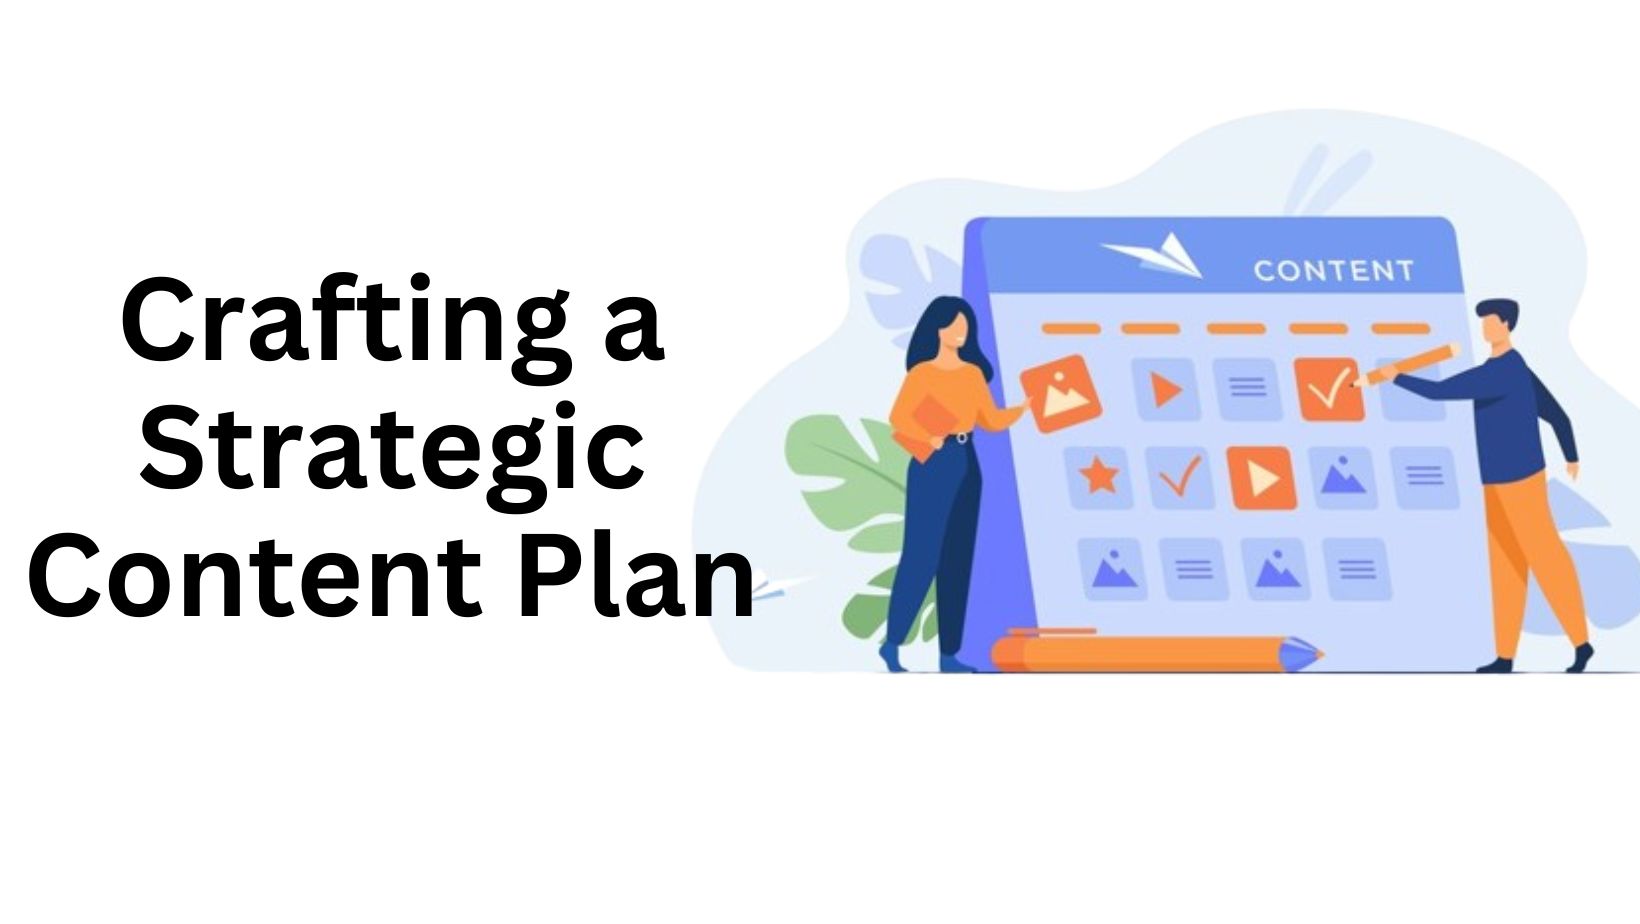 Crafting a Strategic Content Plan